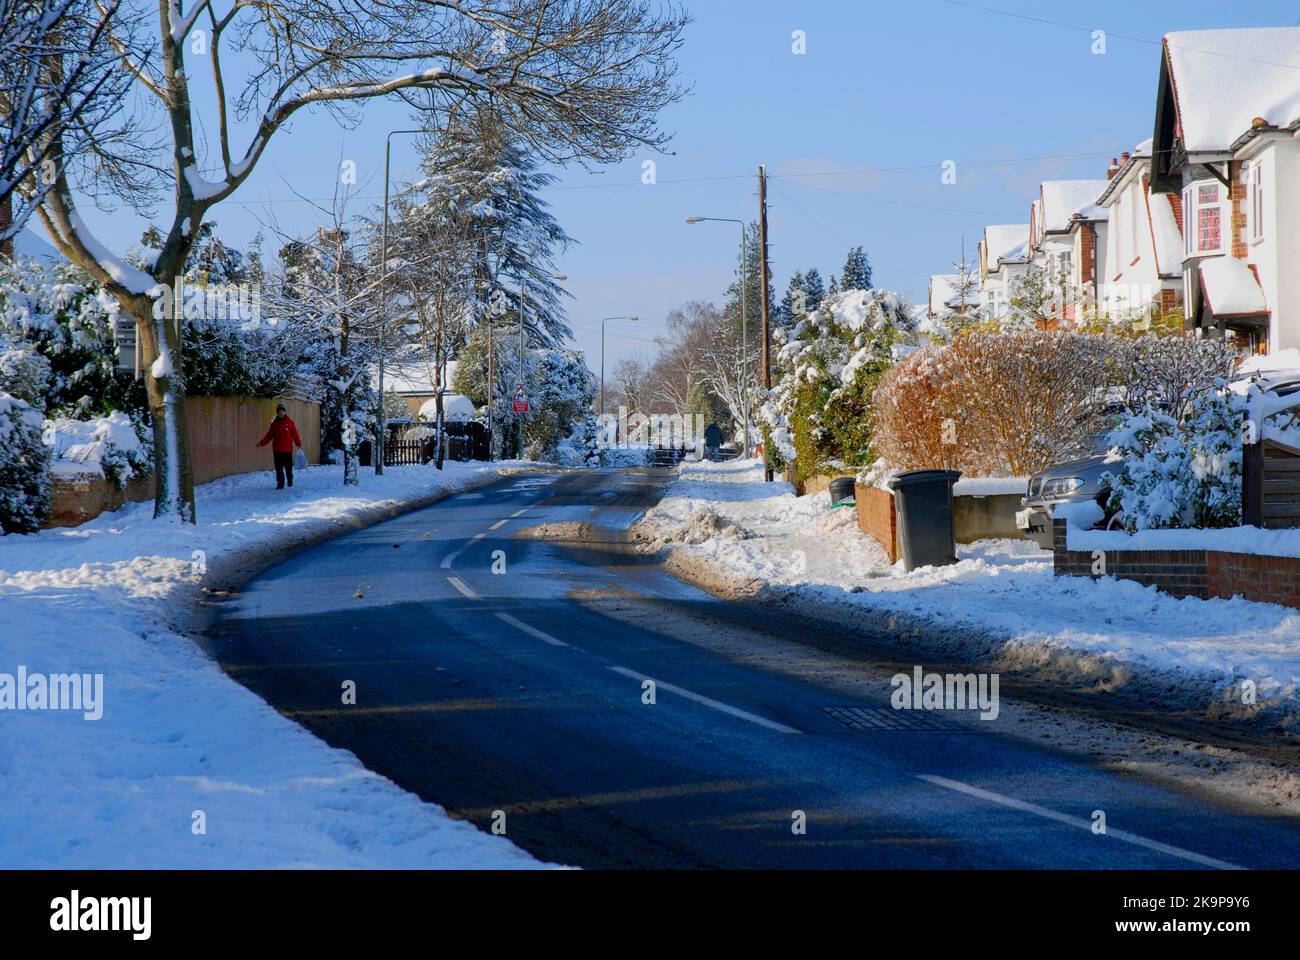 A curved, residential suburban street after snowfall, with the snow on the road surface turning to slush and pedestrians walking with great care Stock Photo